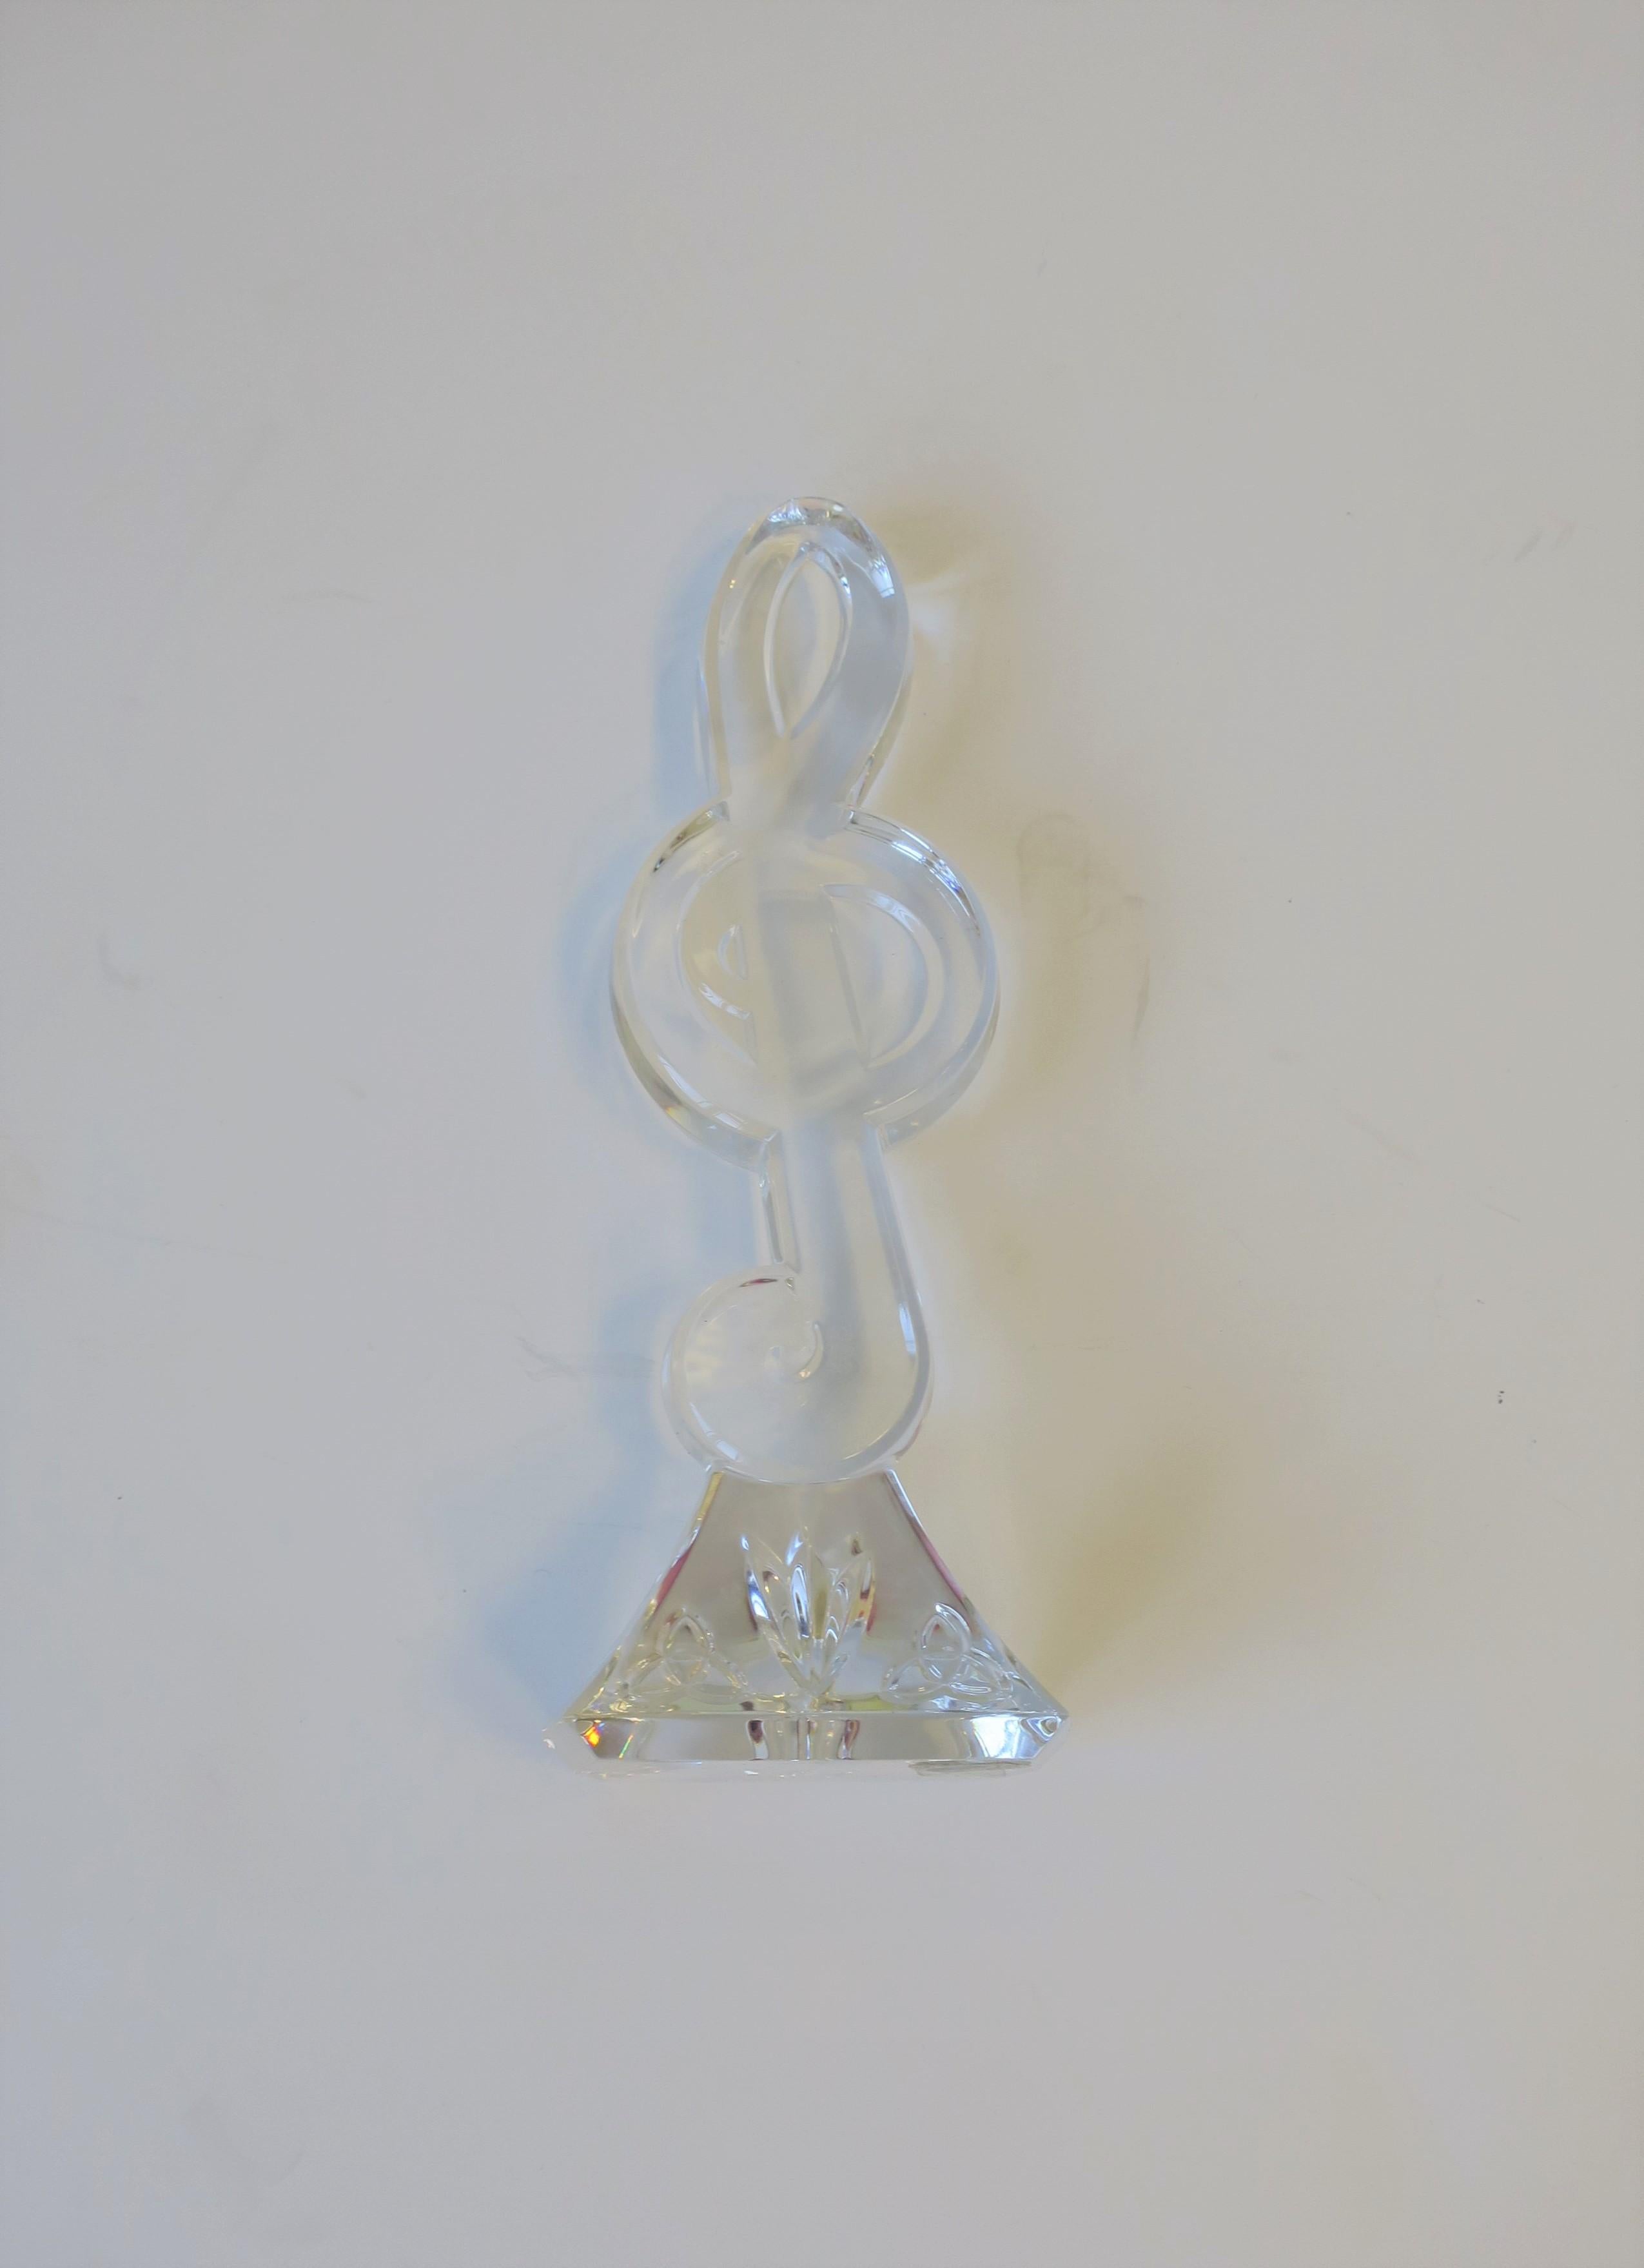 From luxury crystal maker Waterford Crystal, a beautiful 'G' clef crystal music symbol sculpture piece or decorative object, Ireland, circa 20th century. Piece retains authentication acid mark and green and gold Waterford Crystal label on bottom as